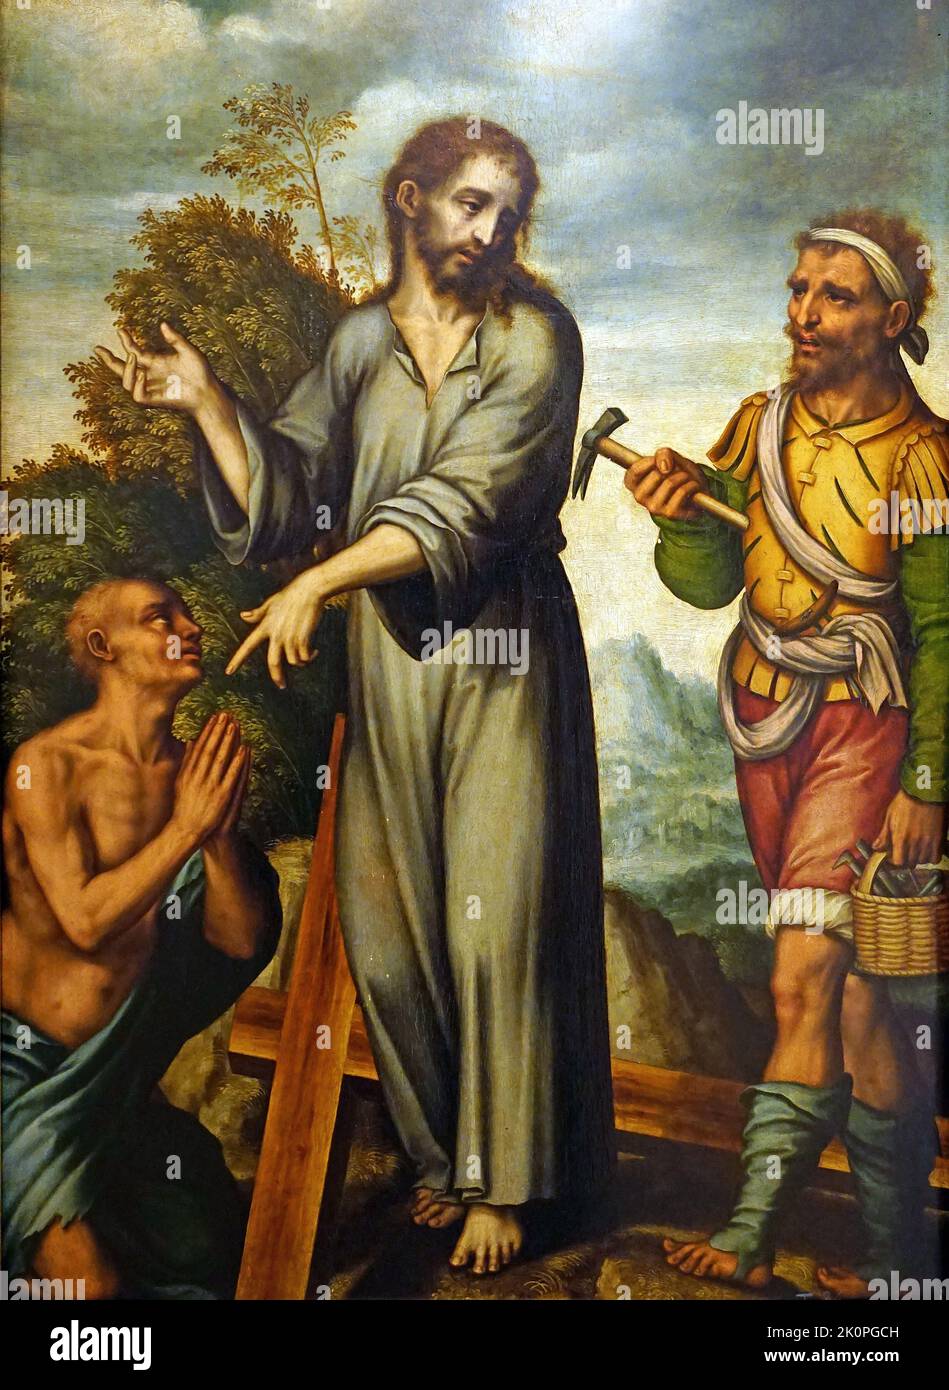 Christ justifying his passion 1562 by spanish painter Luis de Morales (c. 1510-1586) Stock Photo